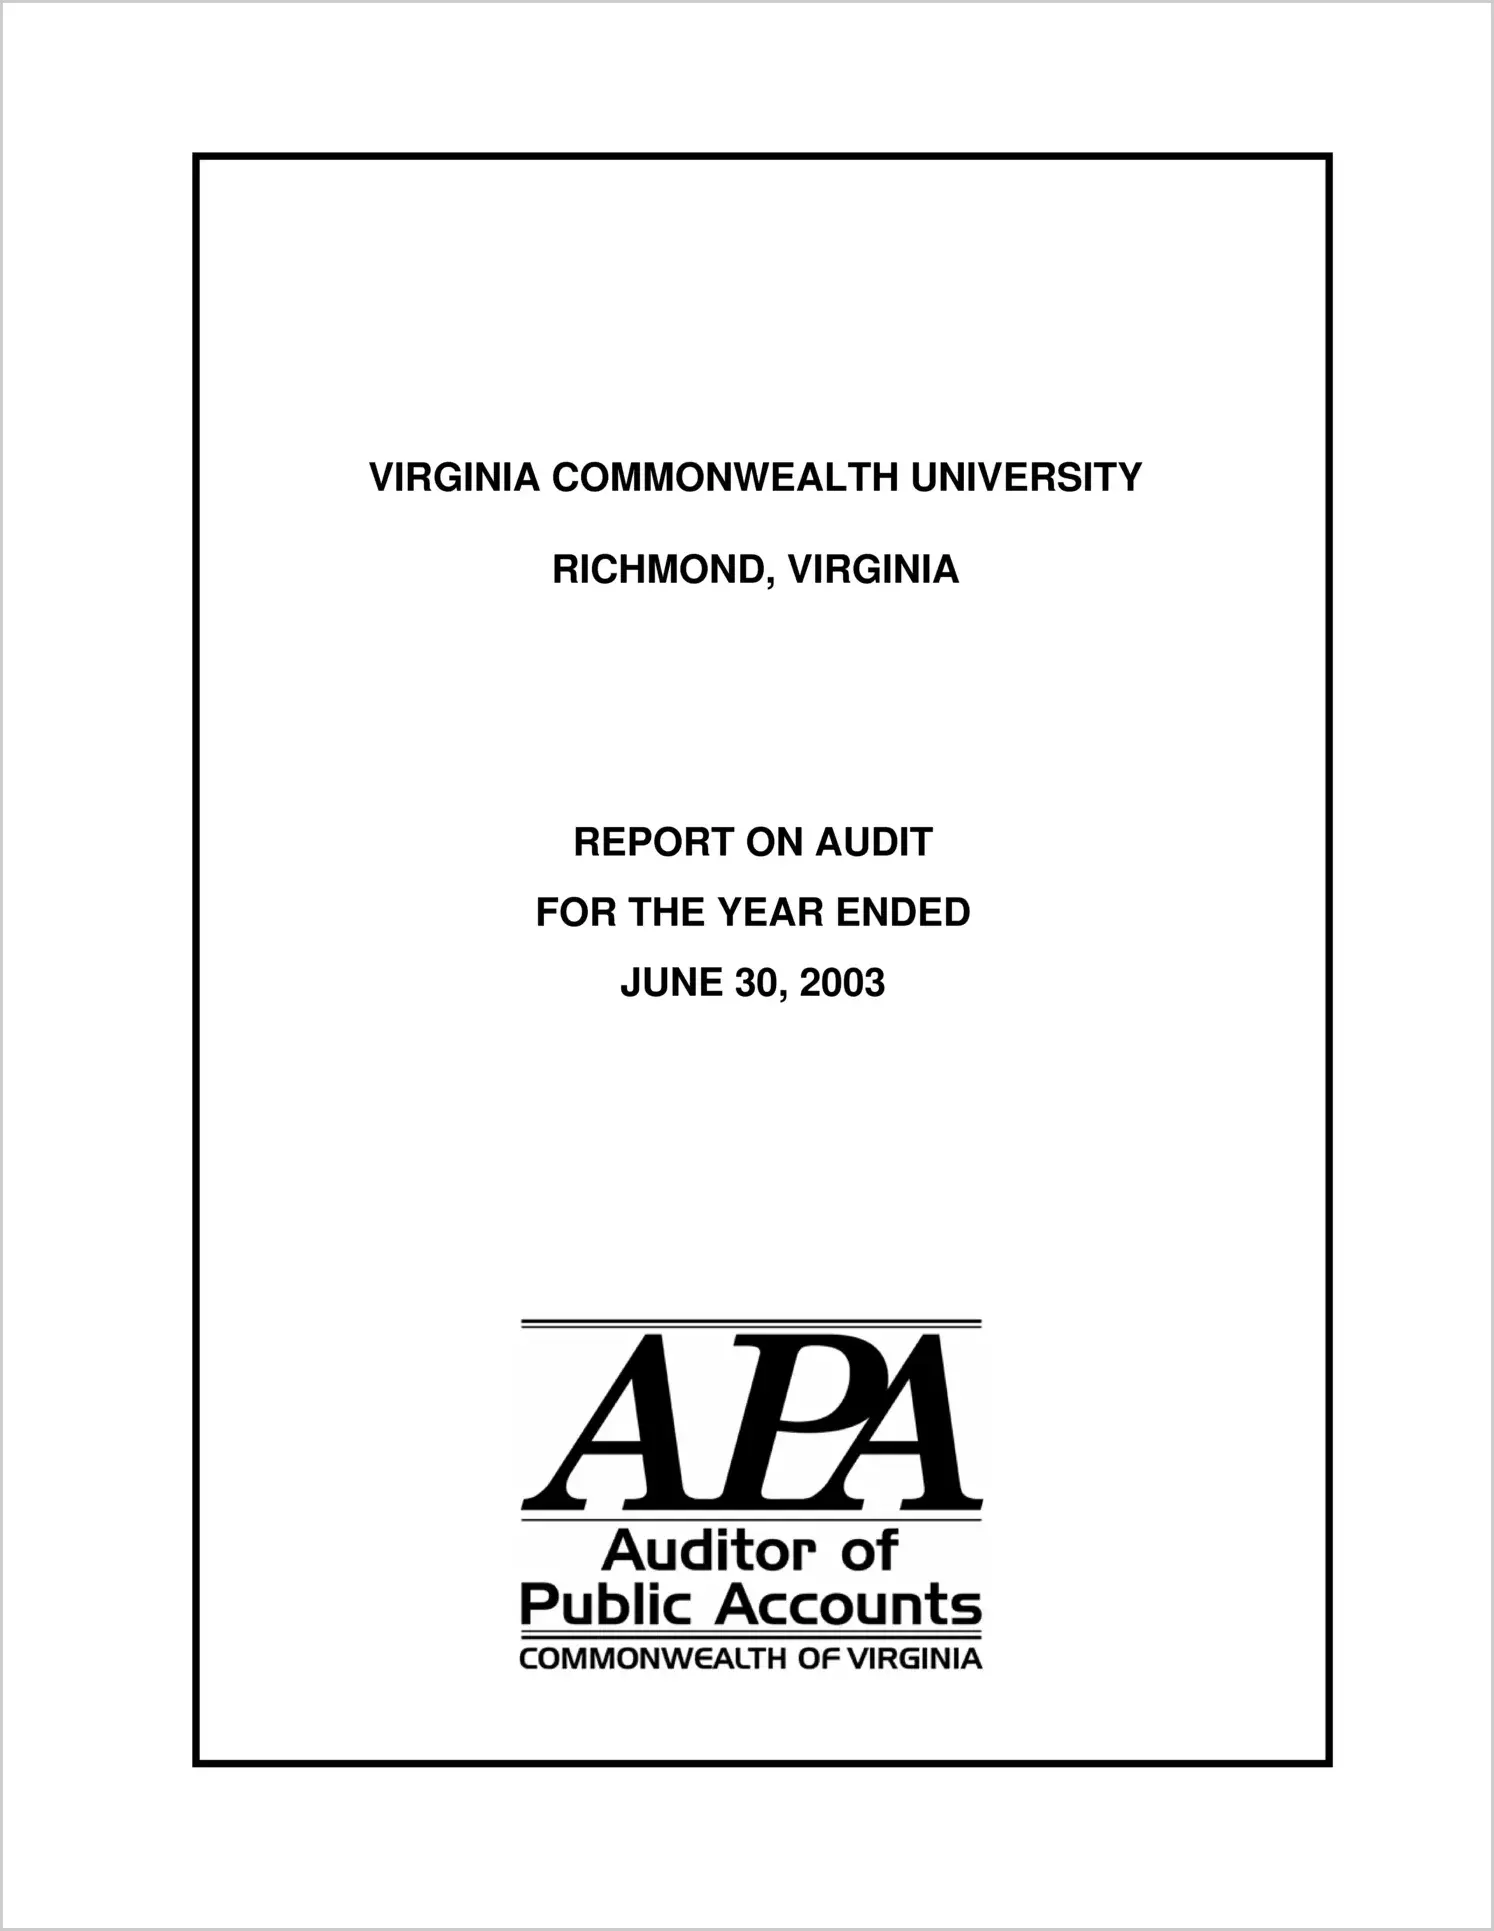 Virginia Commonwealth University for the year ended June 30, 2003